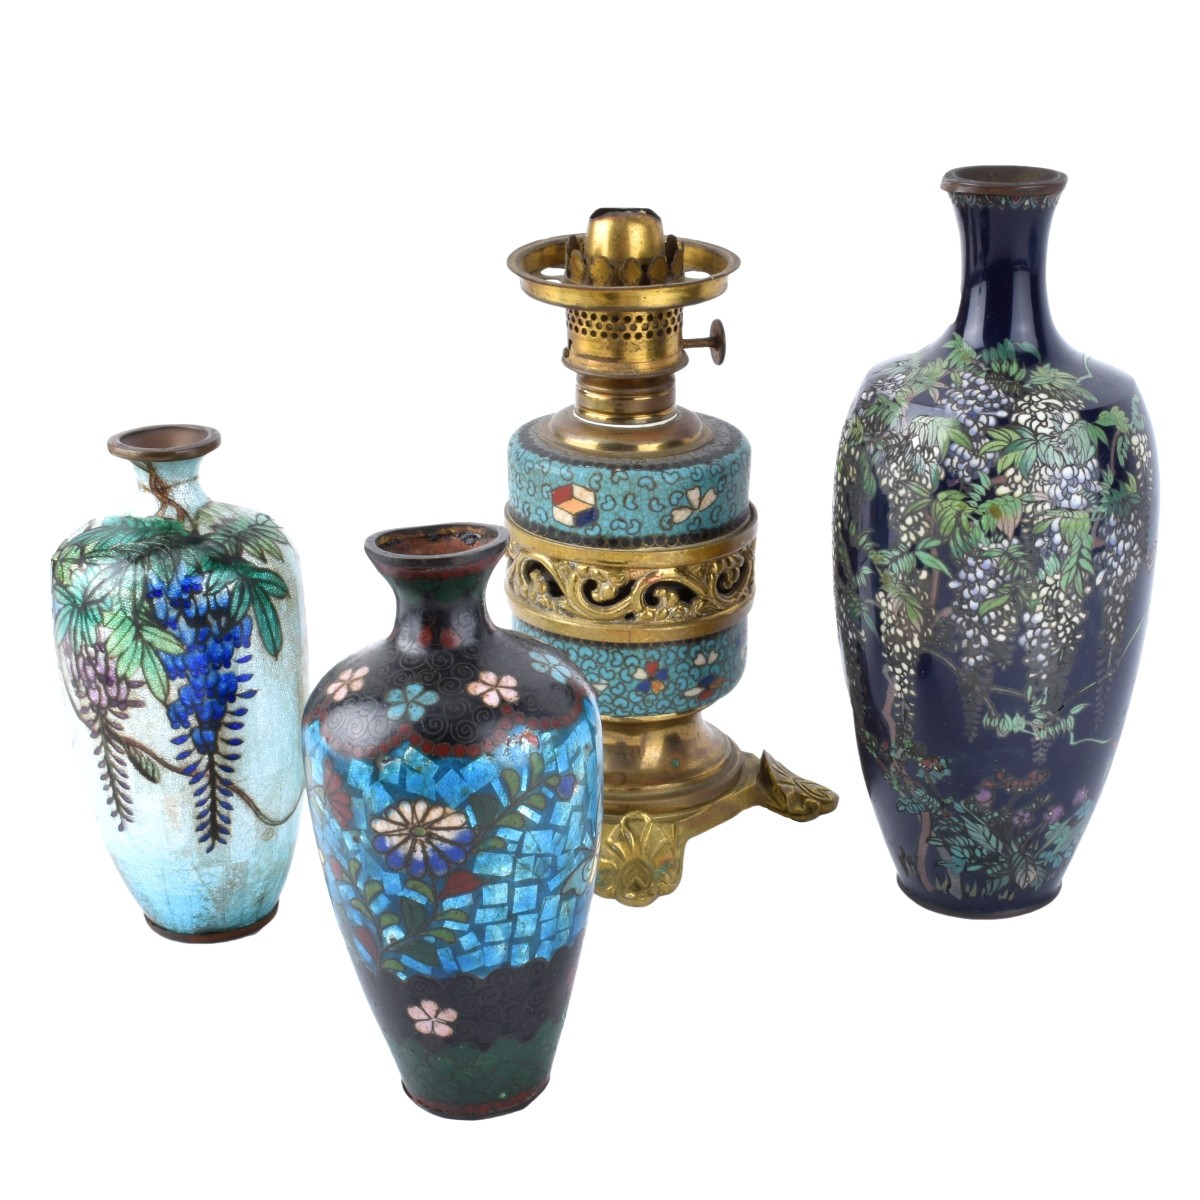 Four (4) Chinese and Japanese Cloisonne Tableware